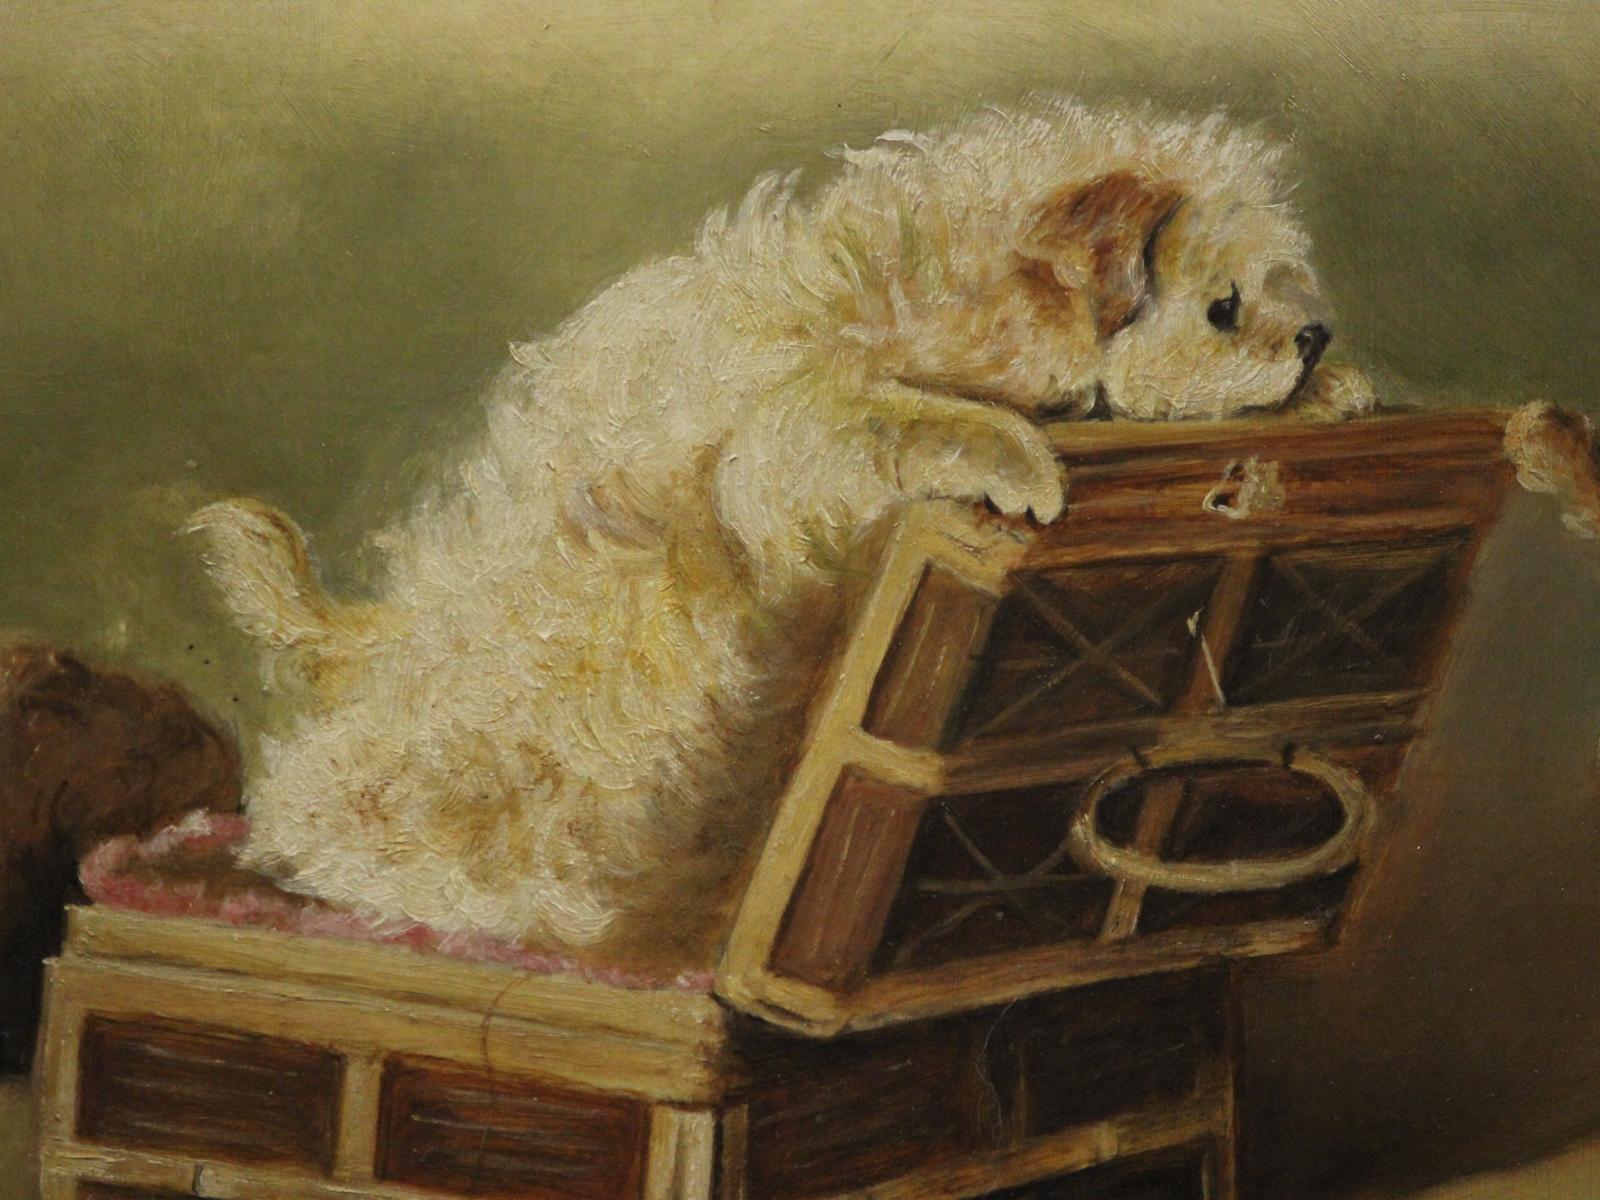 Charming oil on board (signed MCH) depicting a trio of terrier puppies playing

Art Sz: 9